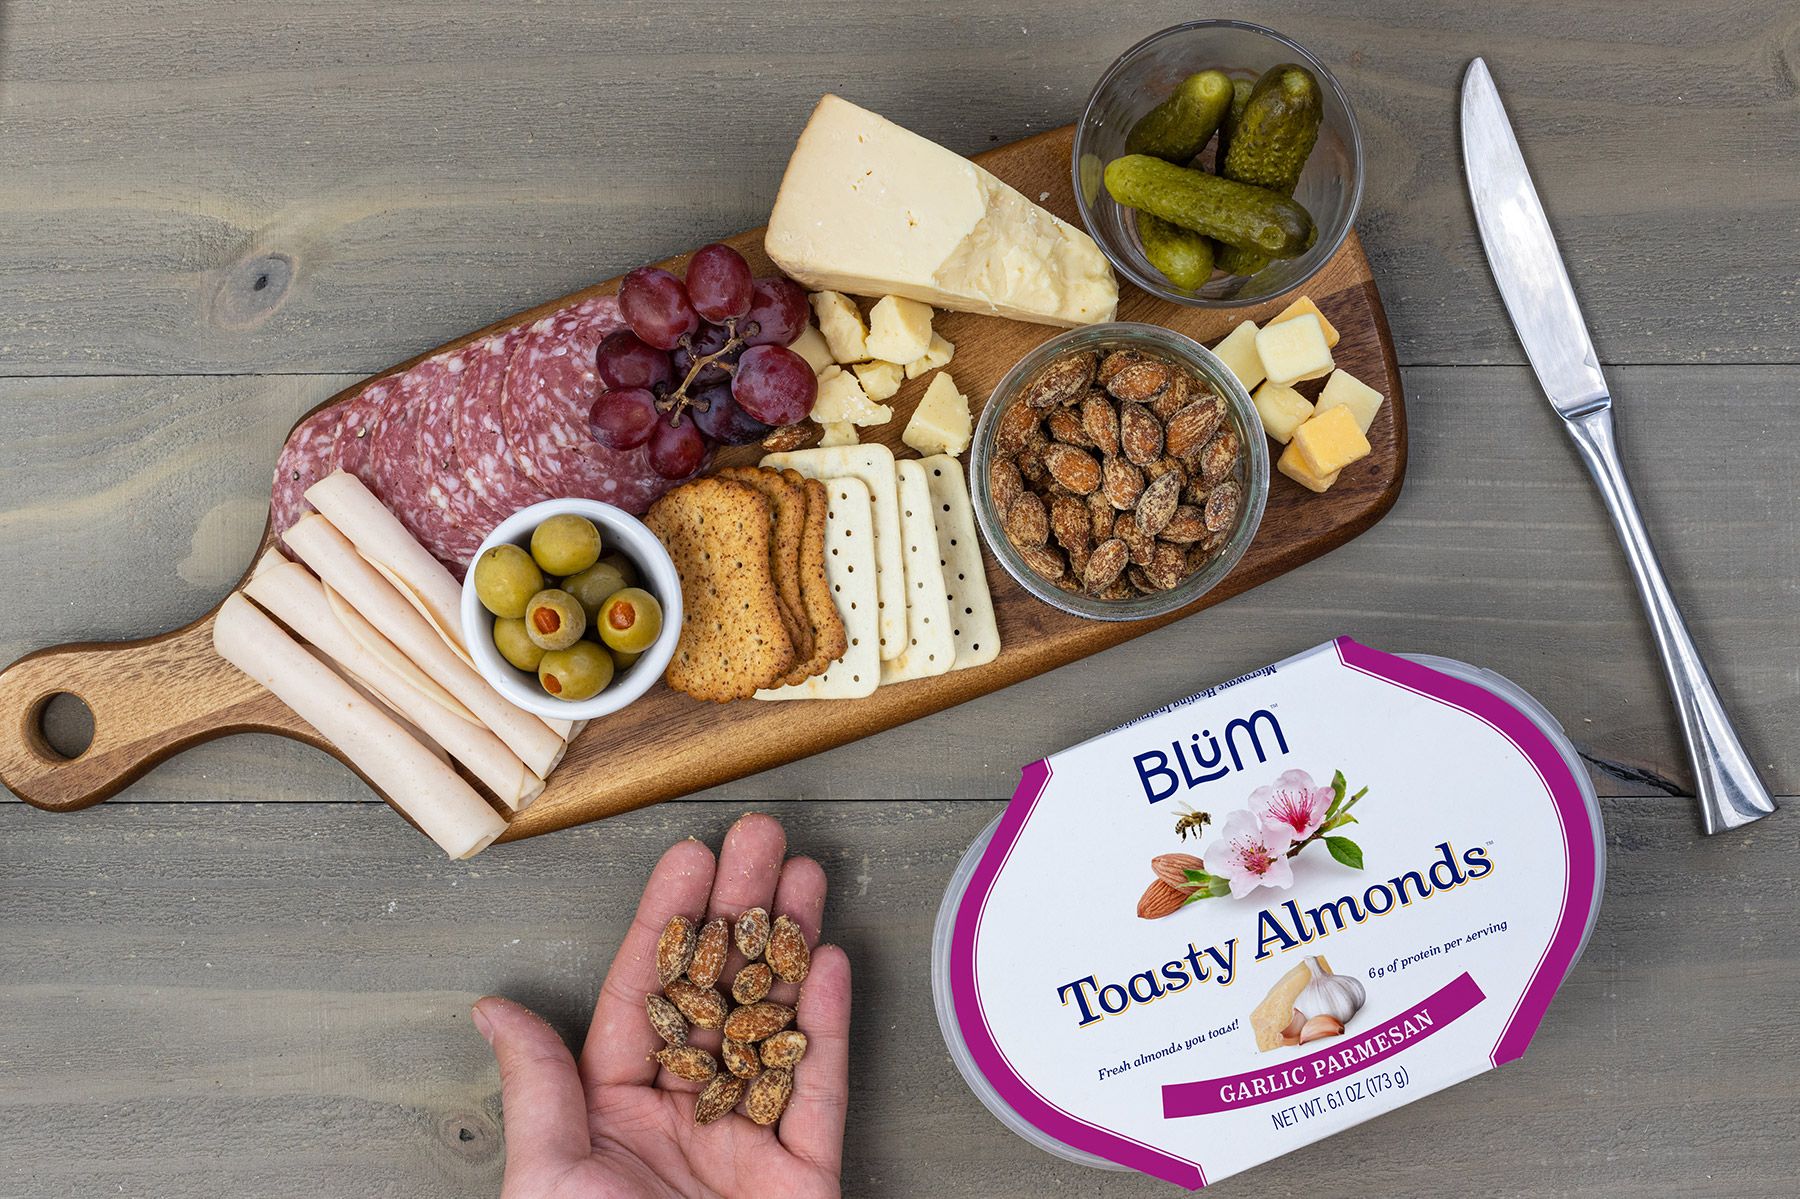 Blum Almonds Website, Photos, and Marketing Collateral